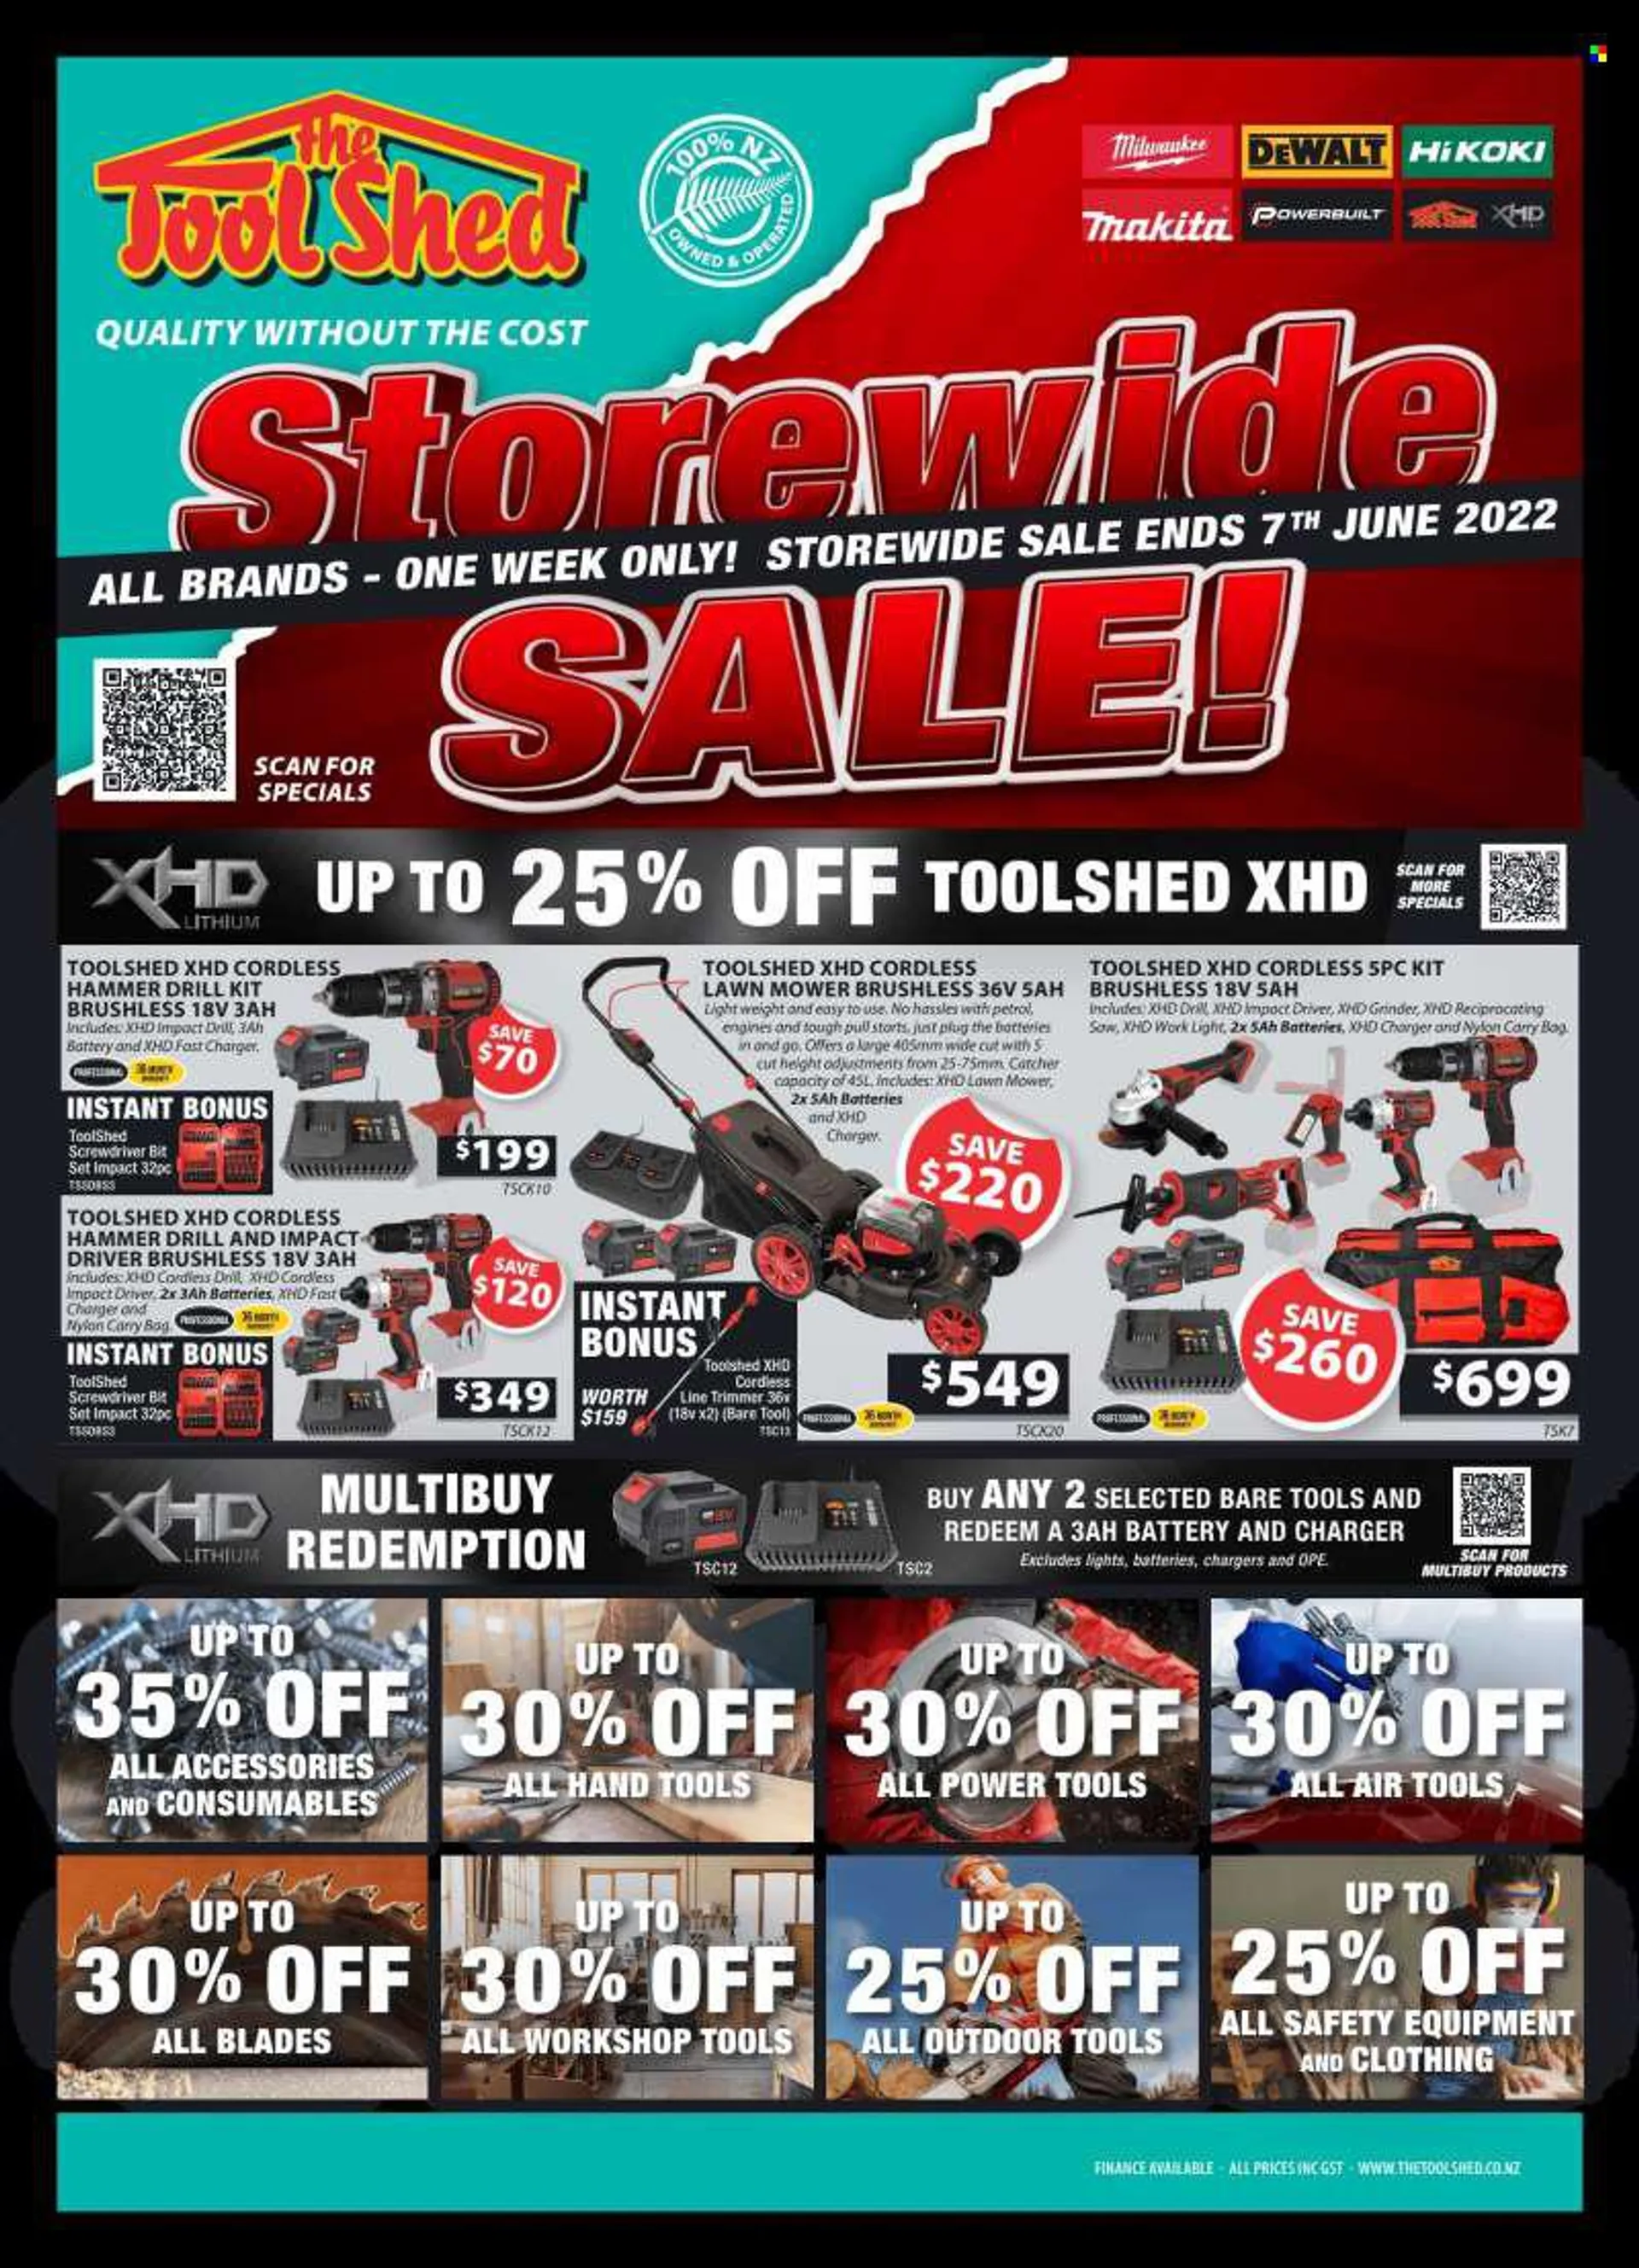 The Tool Shed mailer - 01.06.2022 - 30.06.2022. - 1 June 30 June 2022 - Page 1